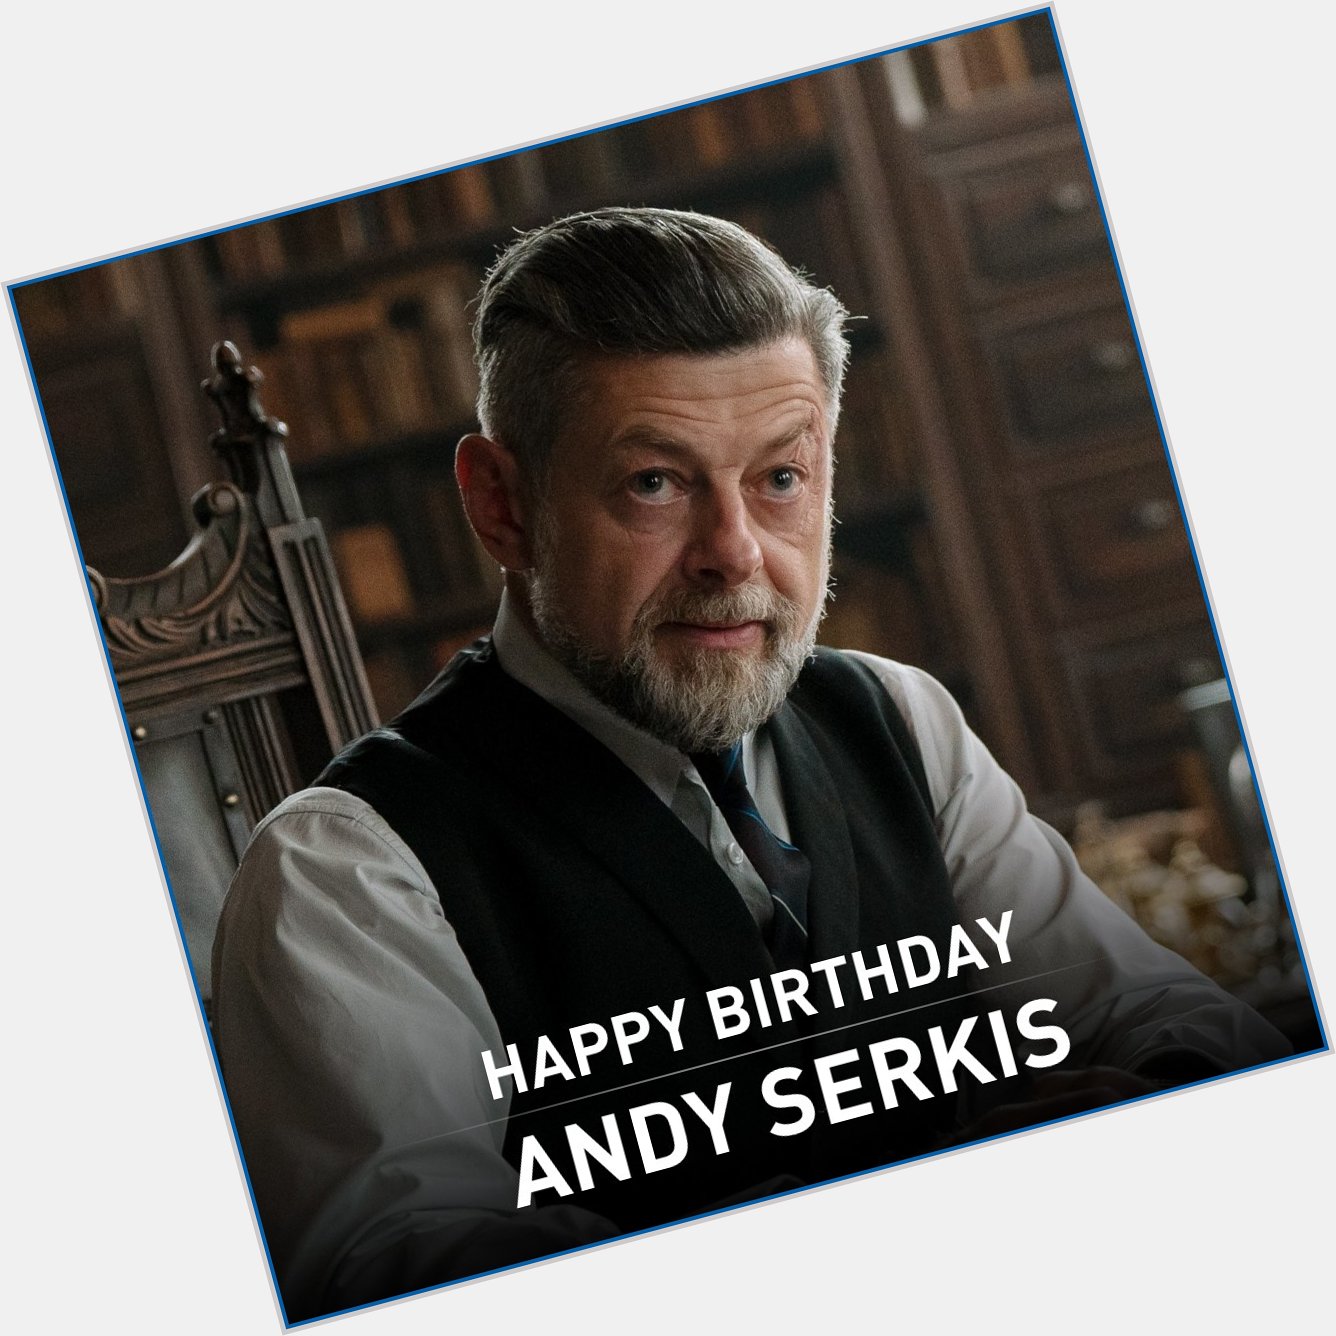 Happy birthday to you Andy serkis 